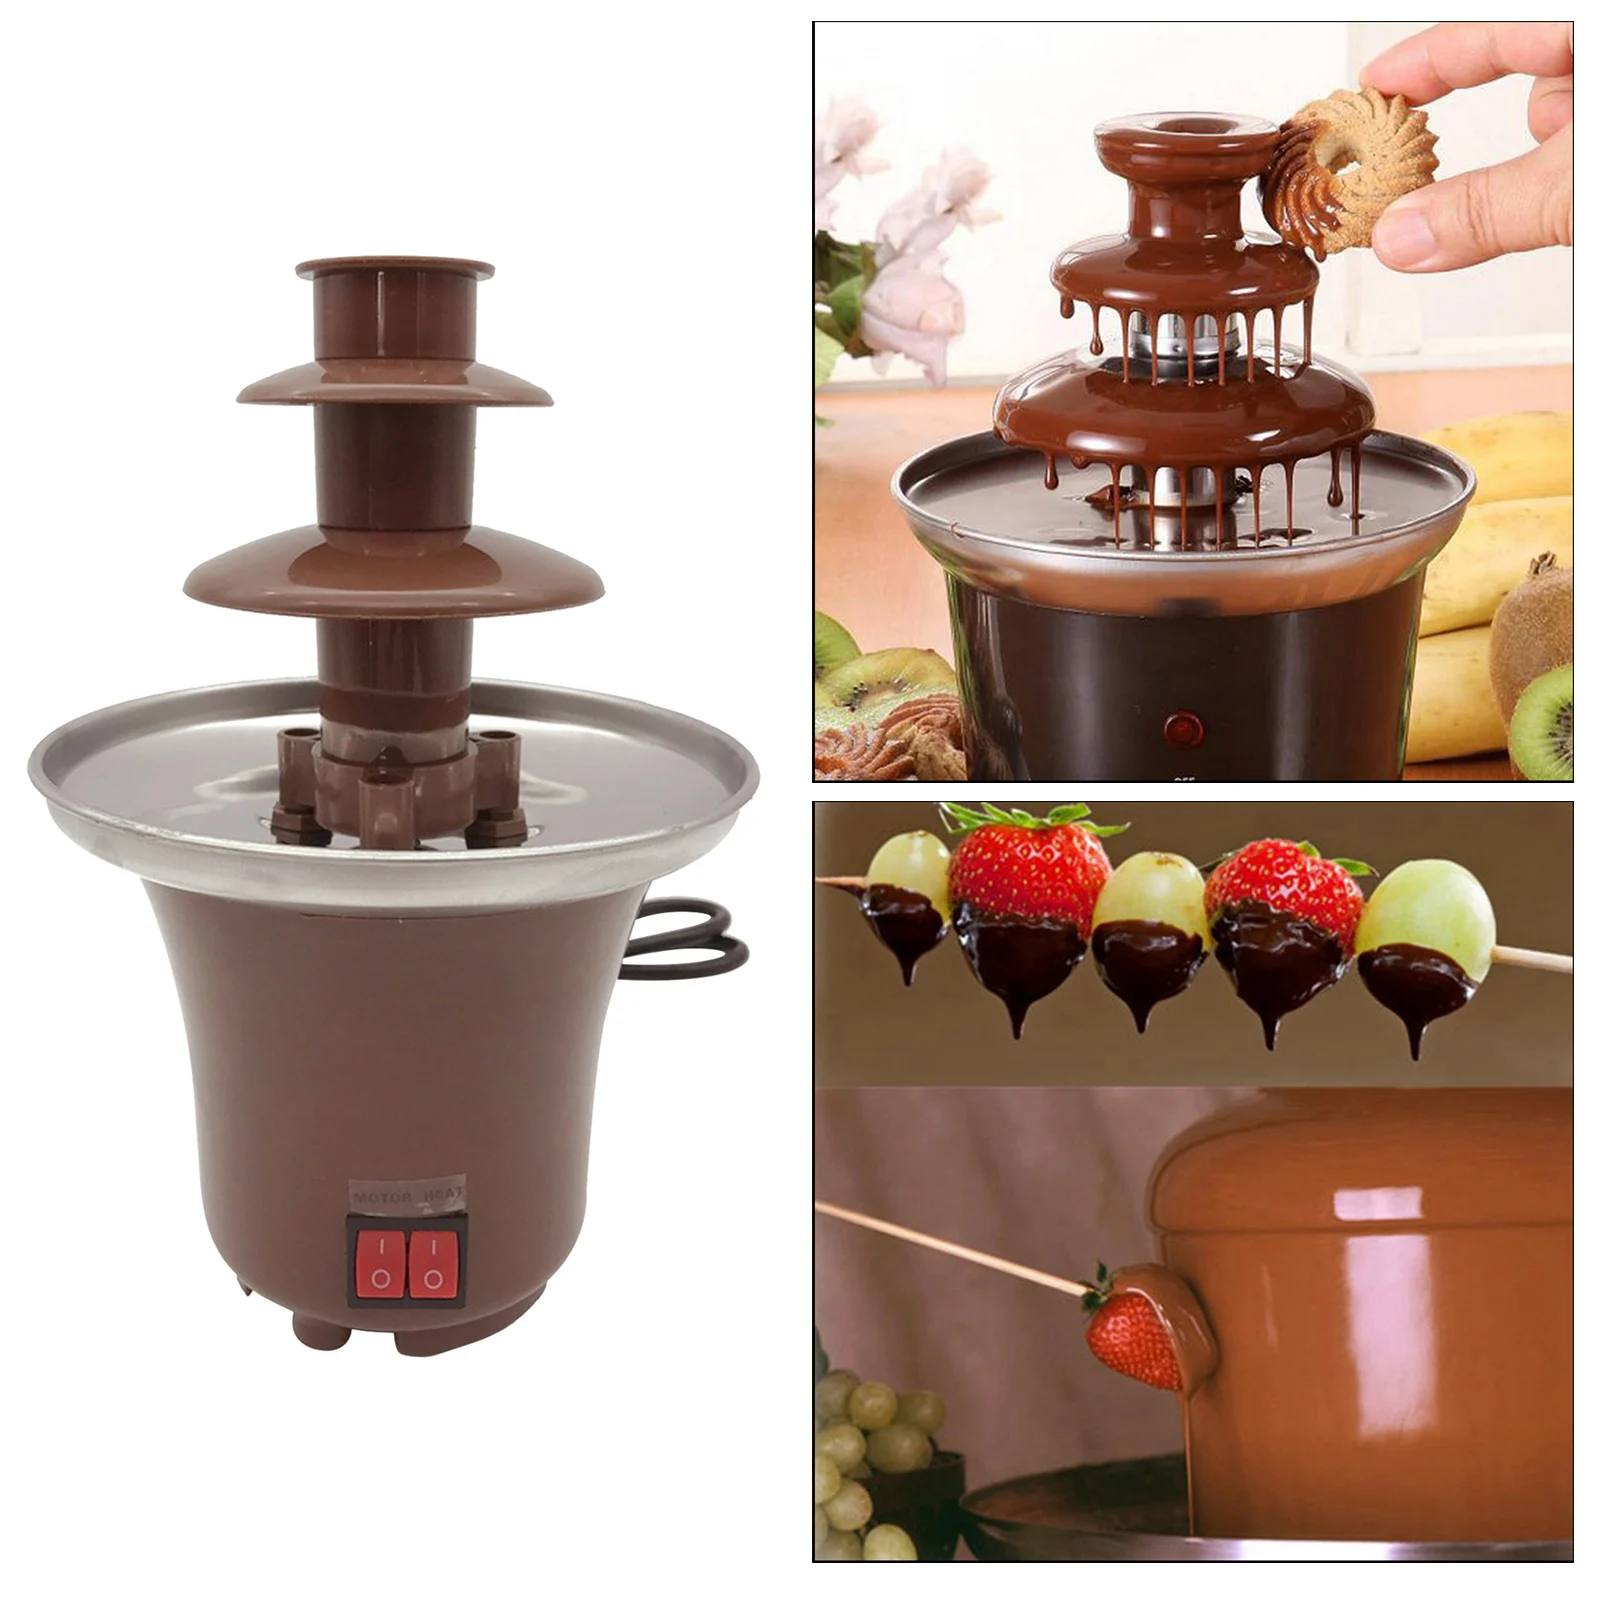 Electirc Chocolate Melt With Heating Fondue Fountain 3 Tier Hotpot for BBQ Sauce Ranch US Plug